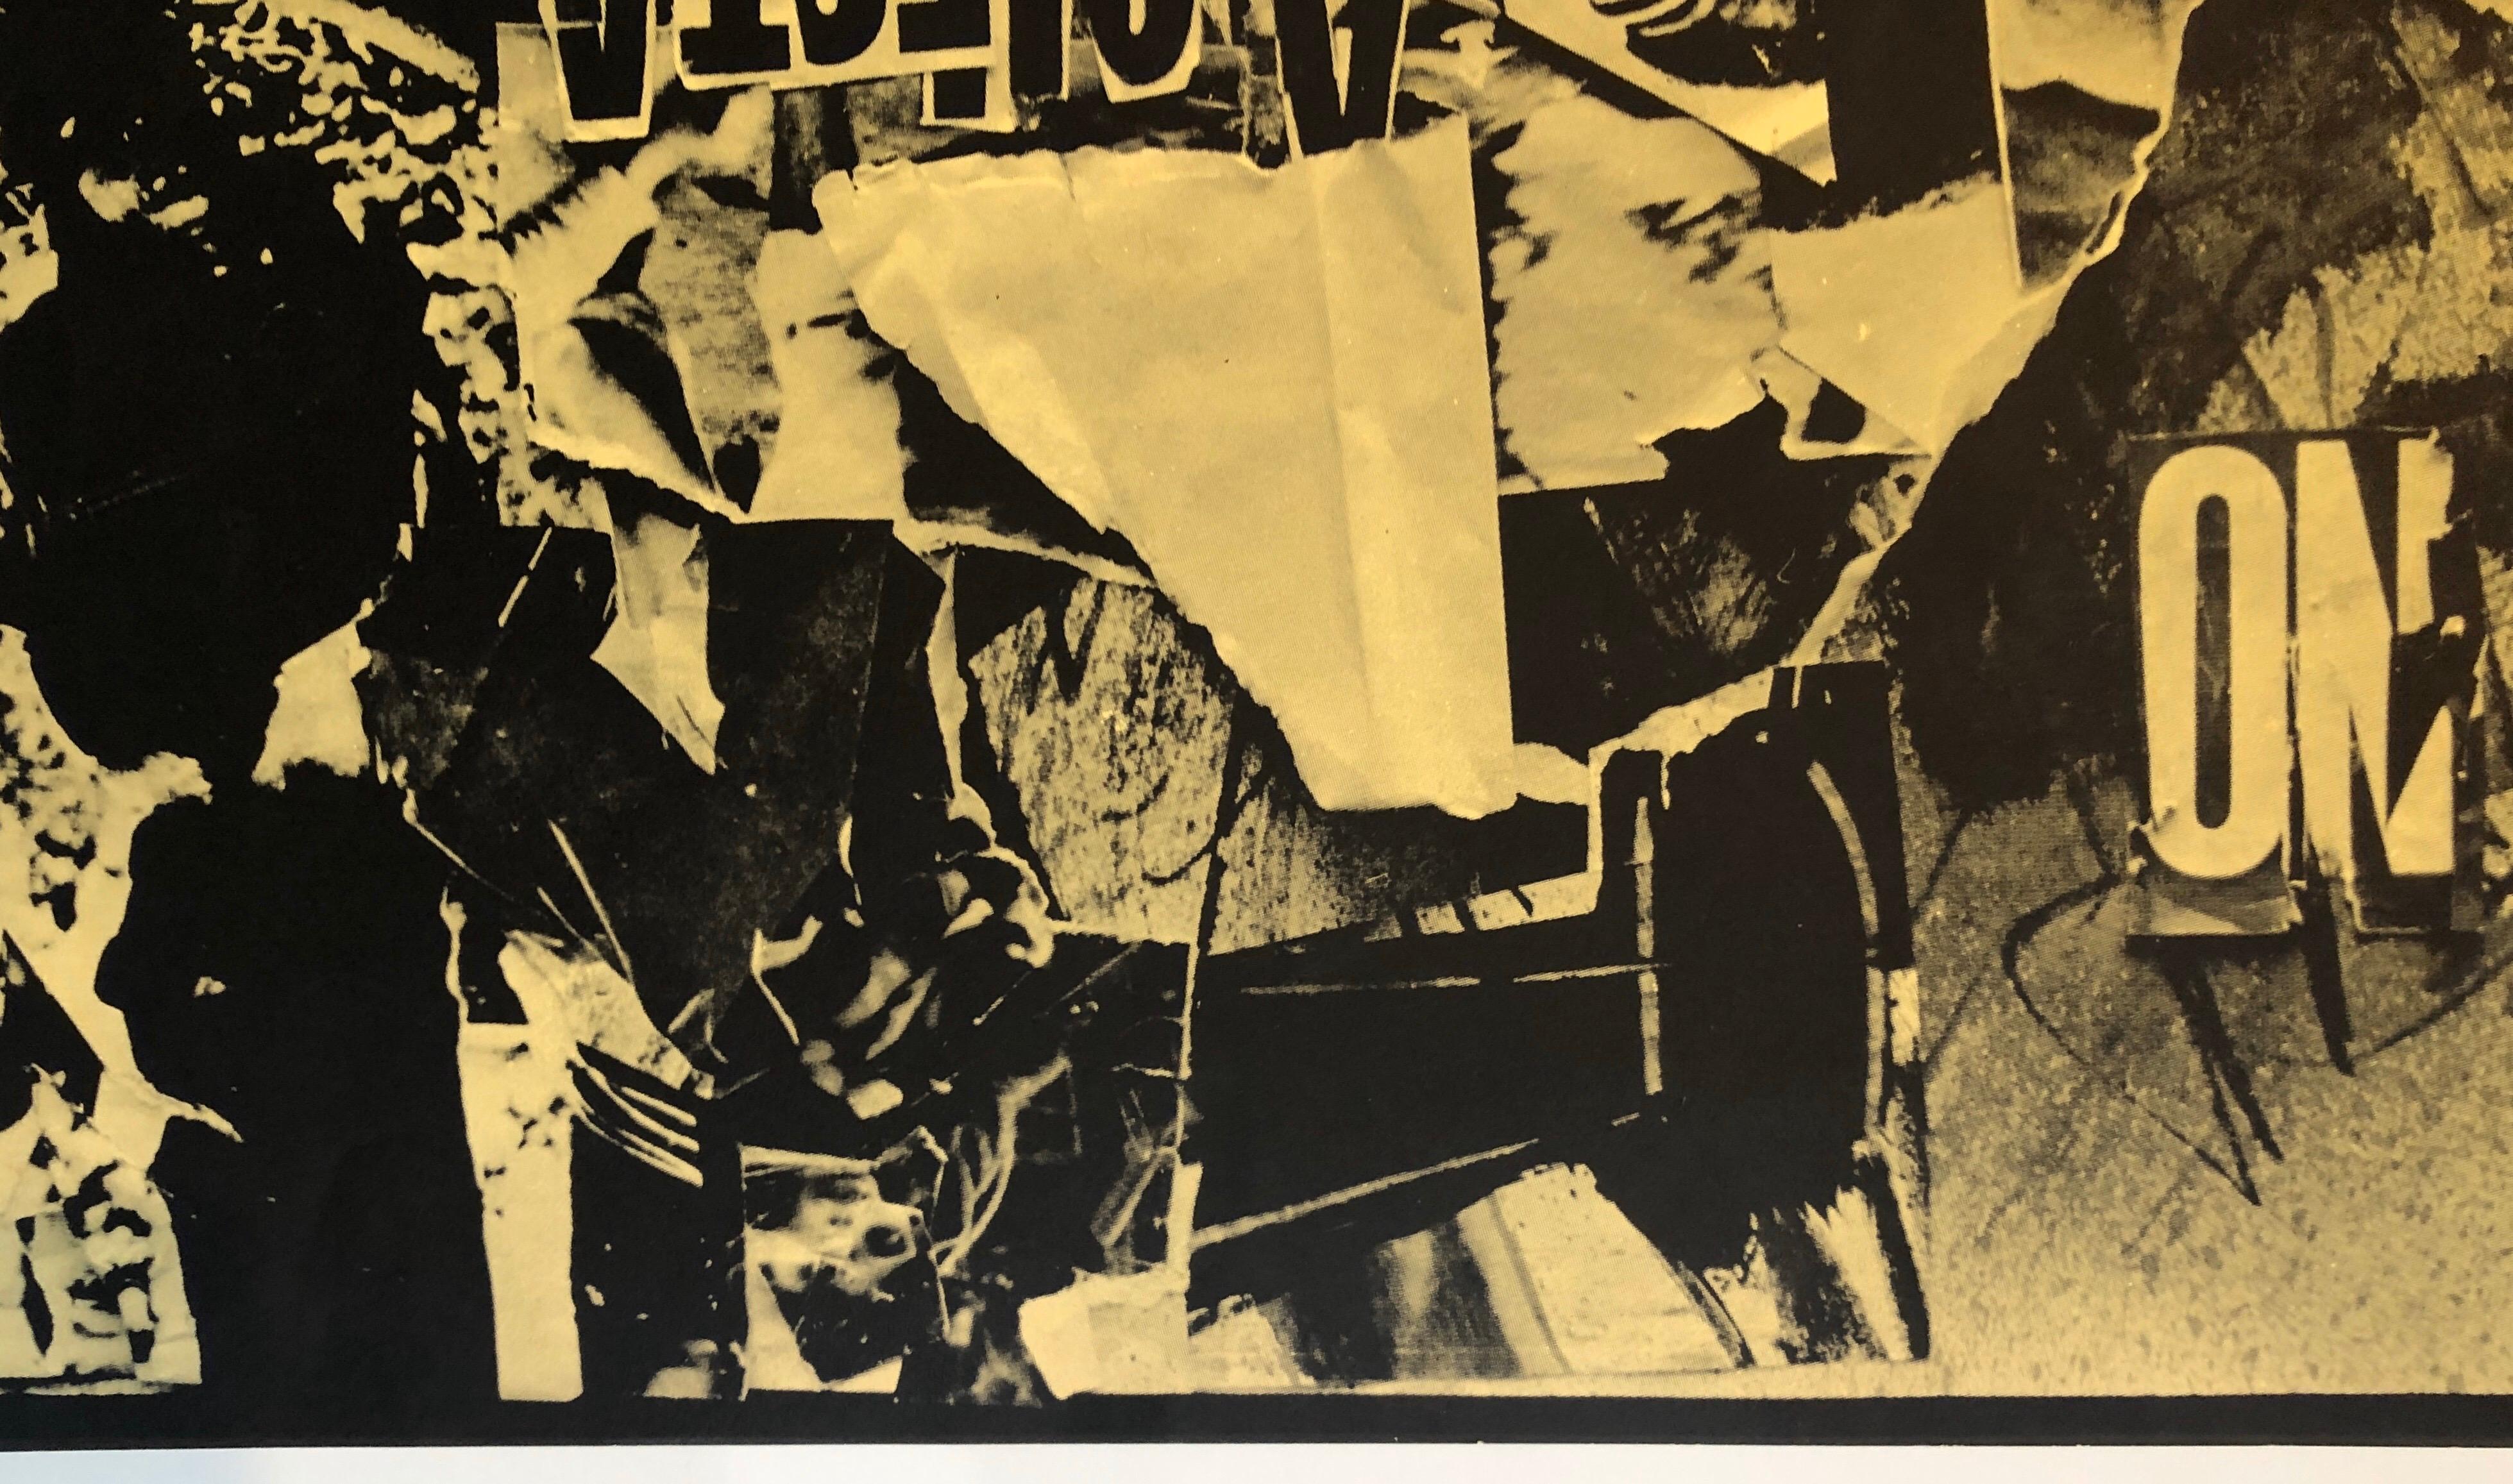 Emilio Vedova (b.1919, Venice Italy) Screenprint lithograph. Offset lithograph in black and yellow on wove paper.
Artist signed in marker across back back,
Screenprint newspaper collage of political events around 1968 uprisings.

Emilio Vedova (9